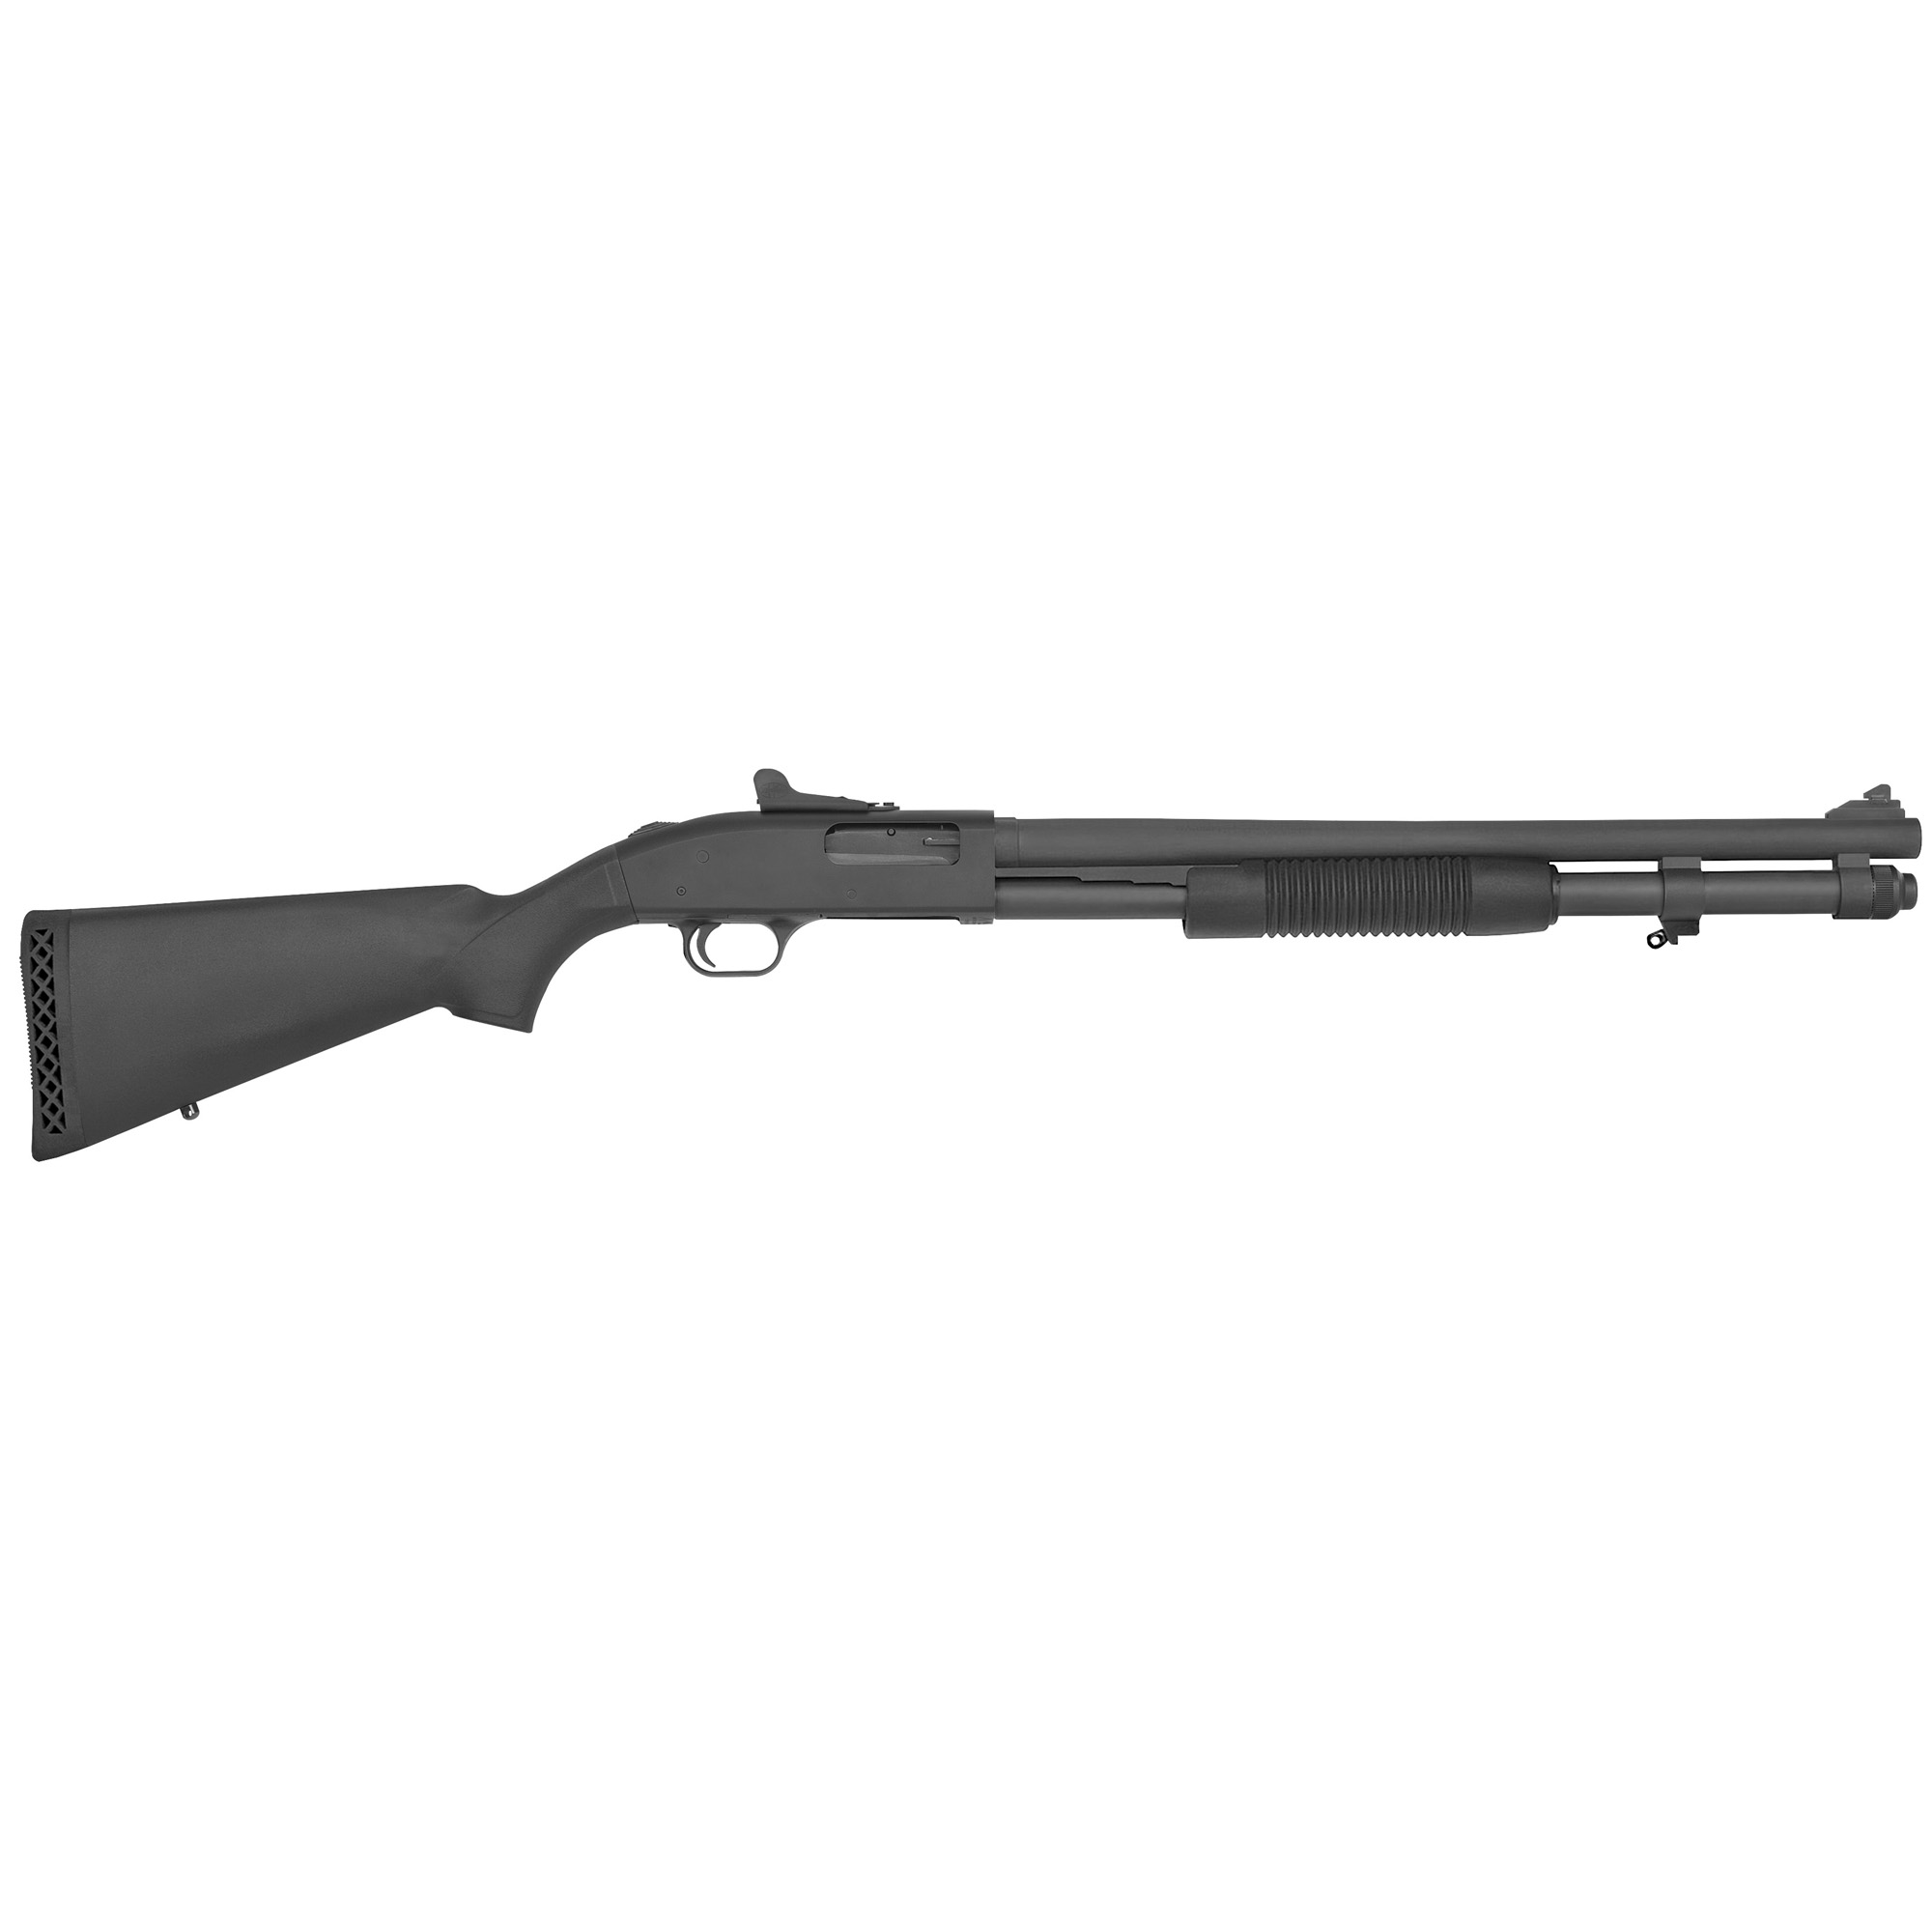 MOSSBERG 590A1 12/20/GRS CYL 8RD PRK